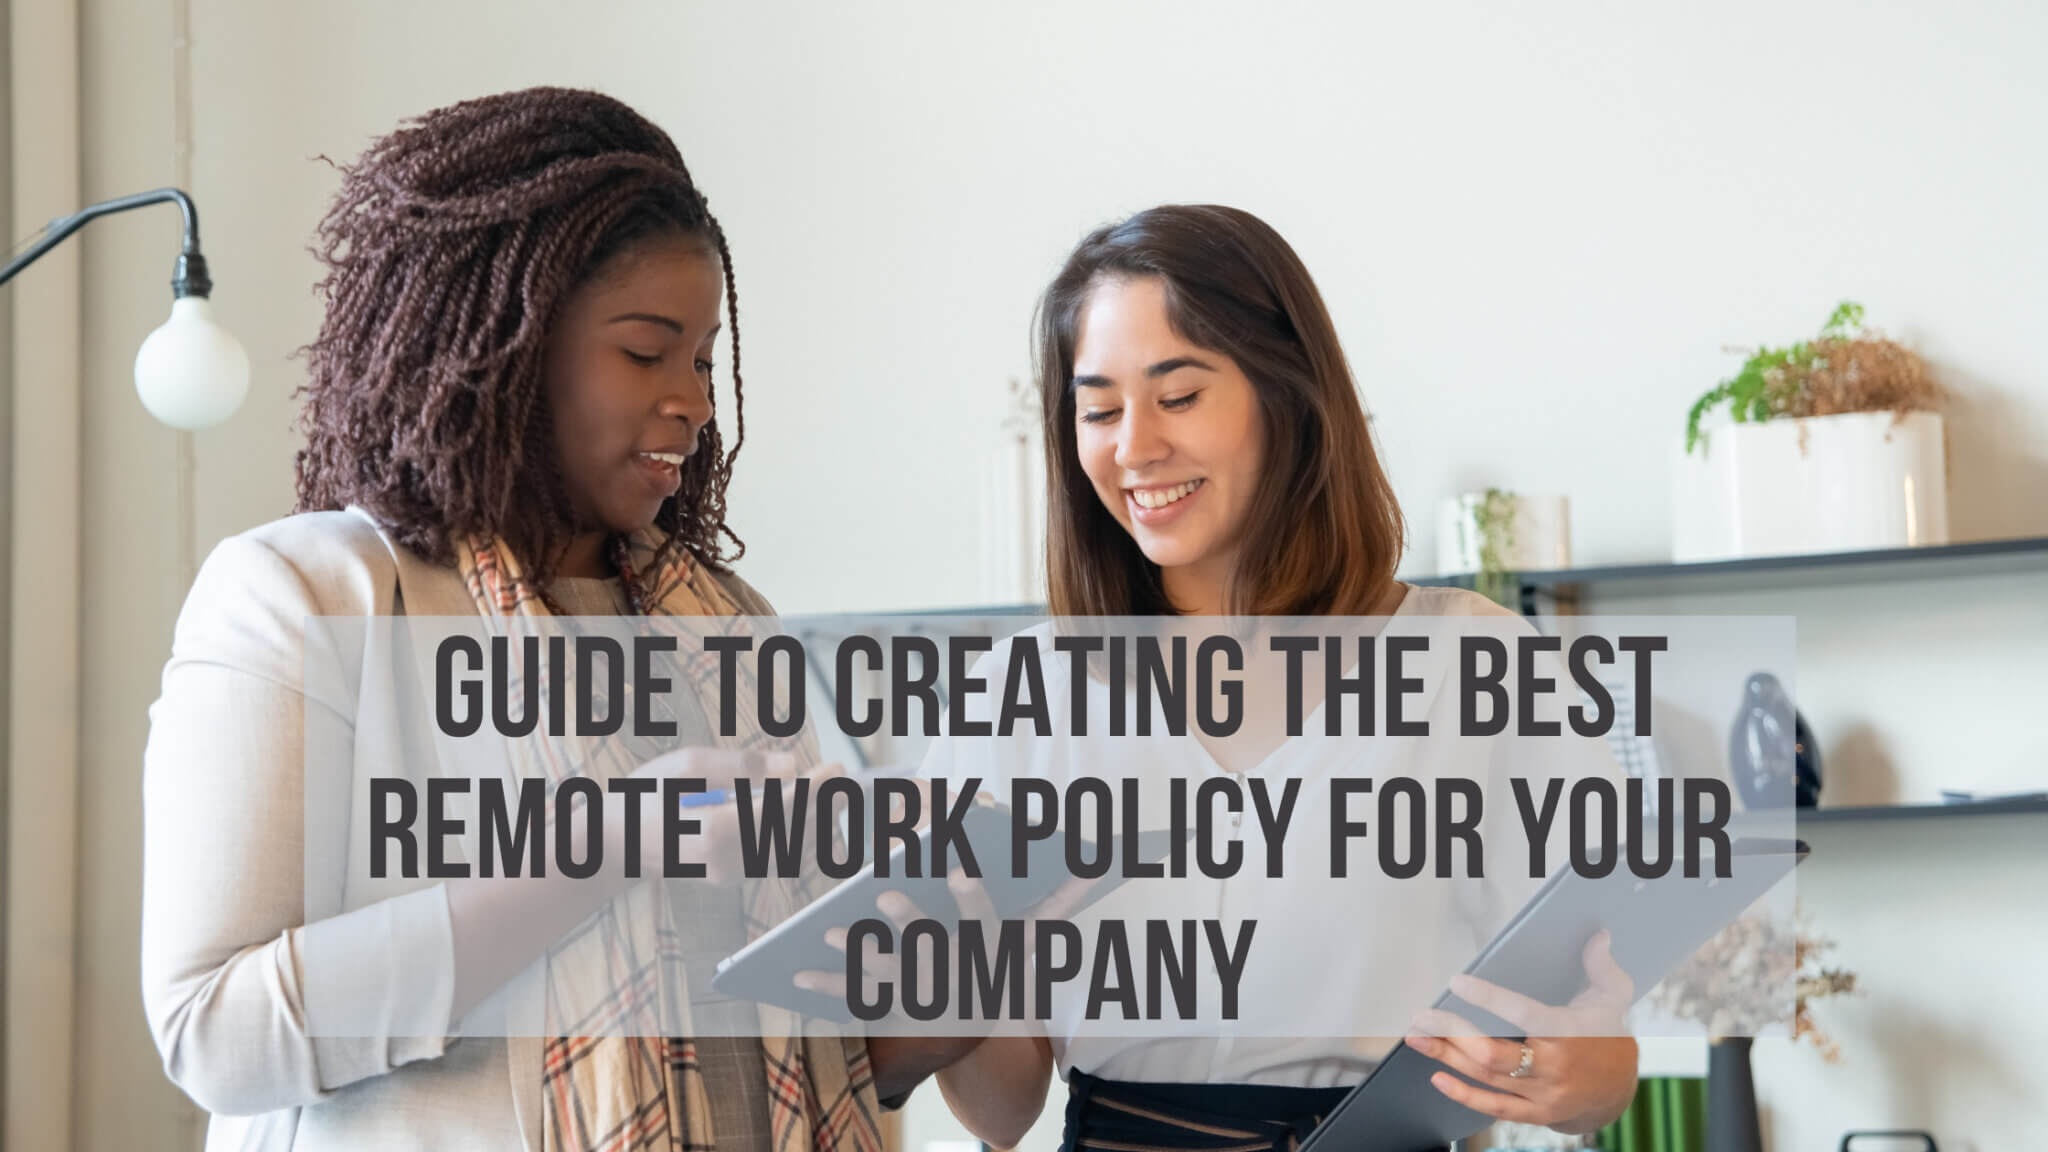 Guide to Creating a Remote Work Policy - Hybrid Remote Work